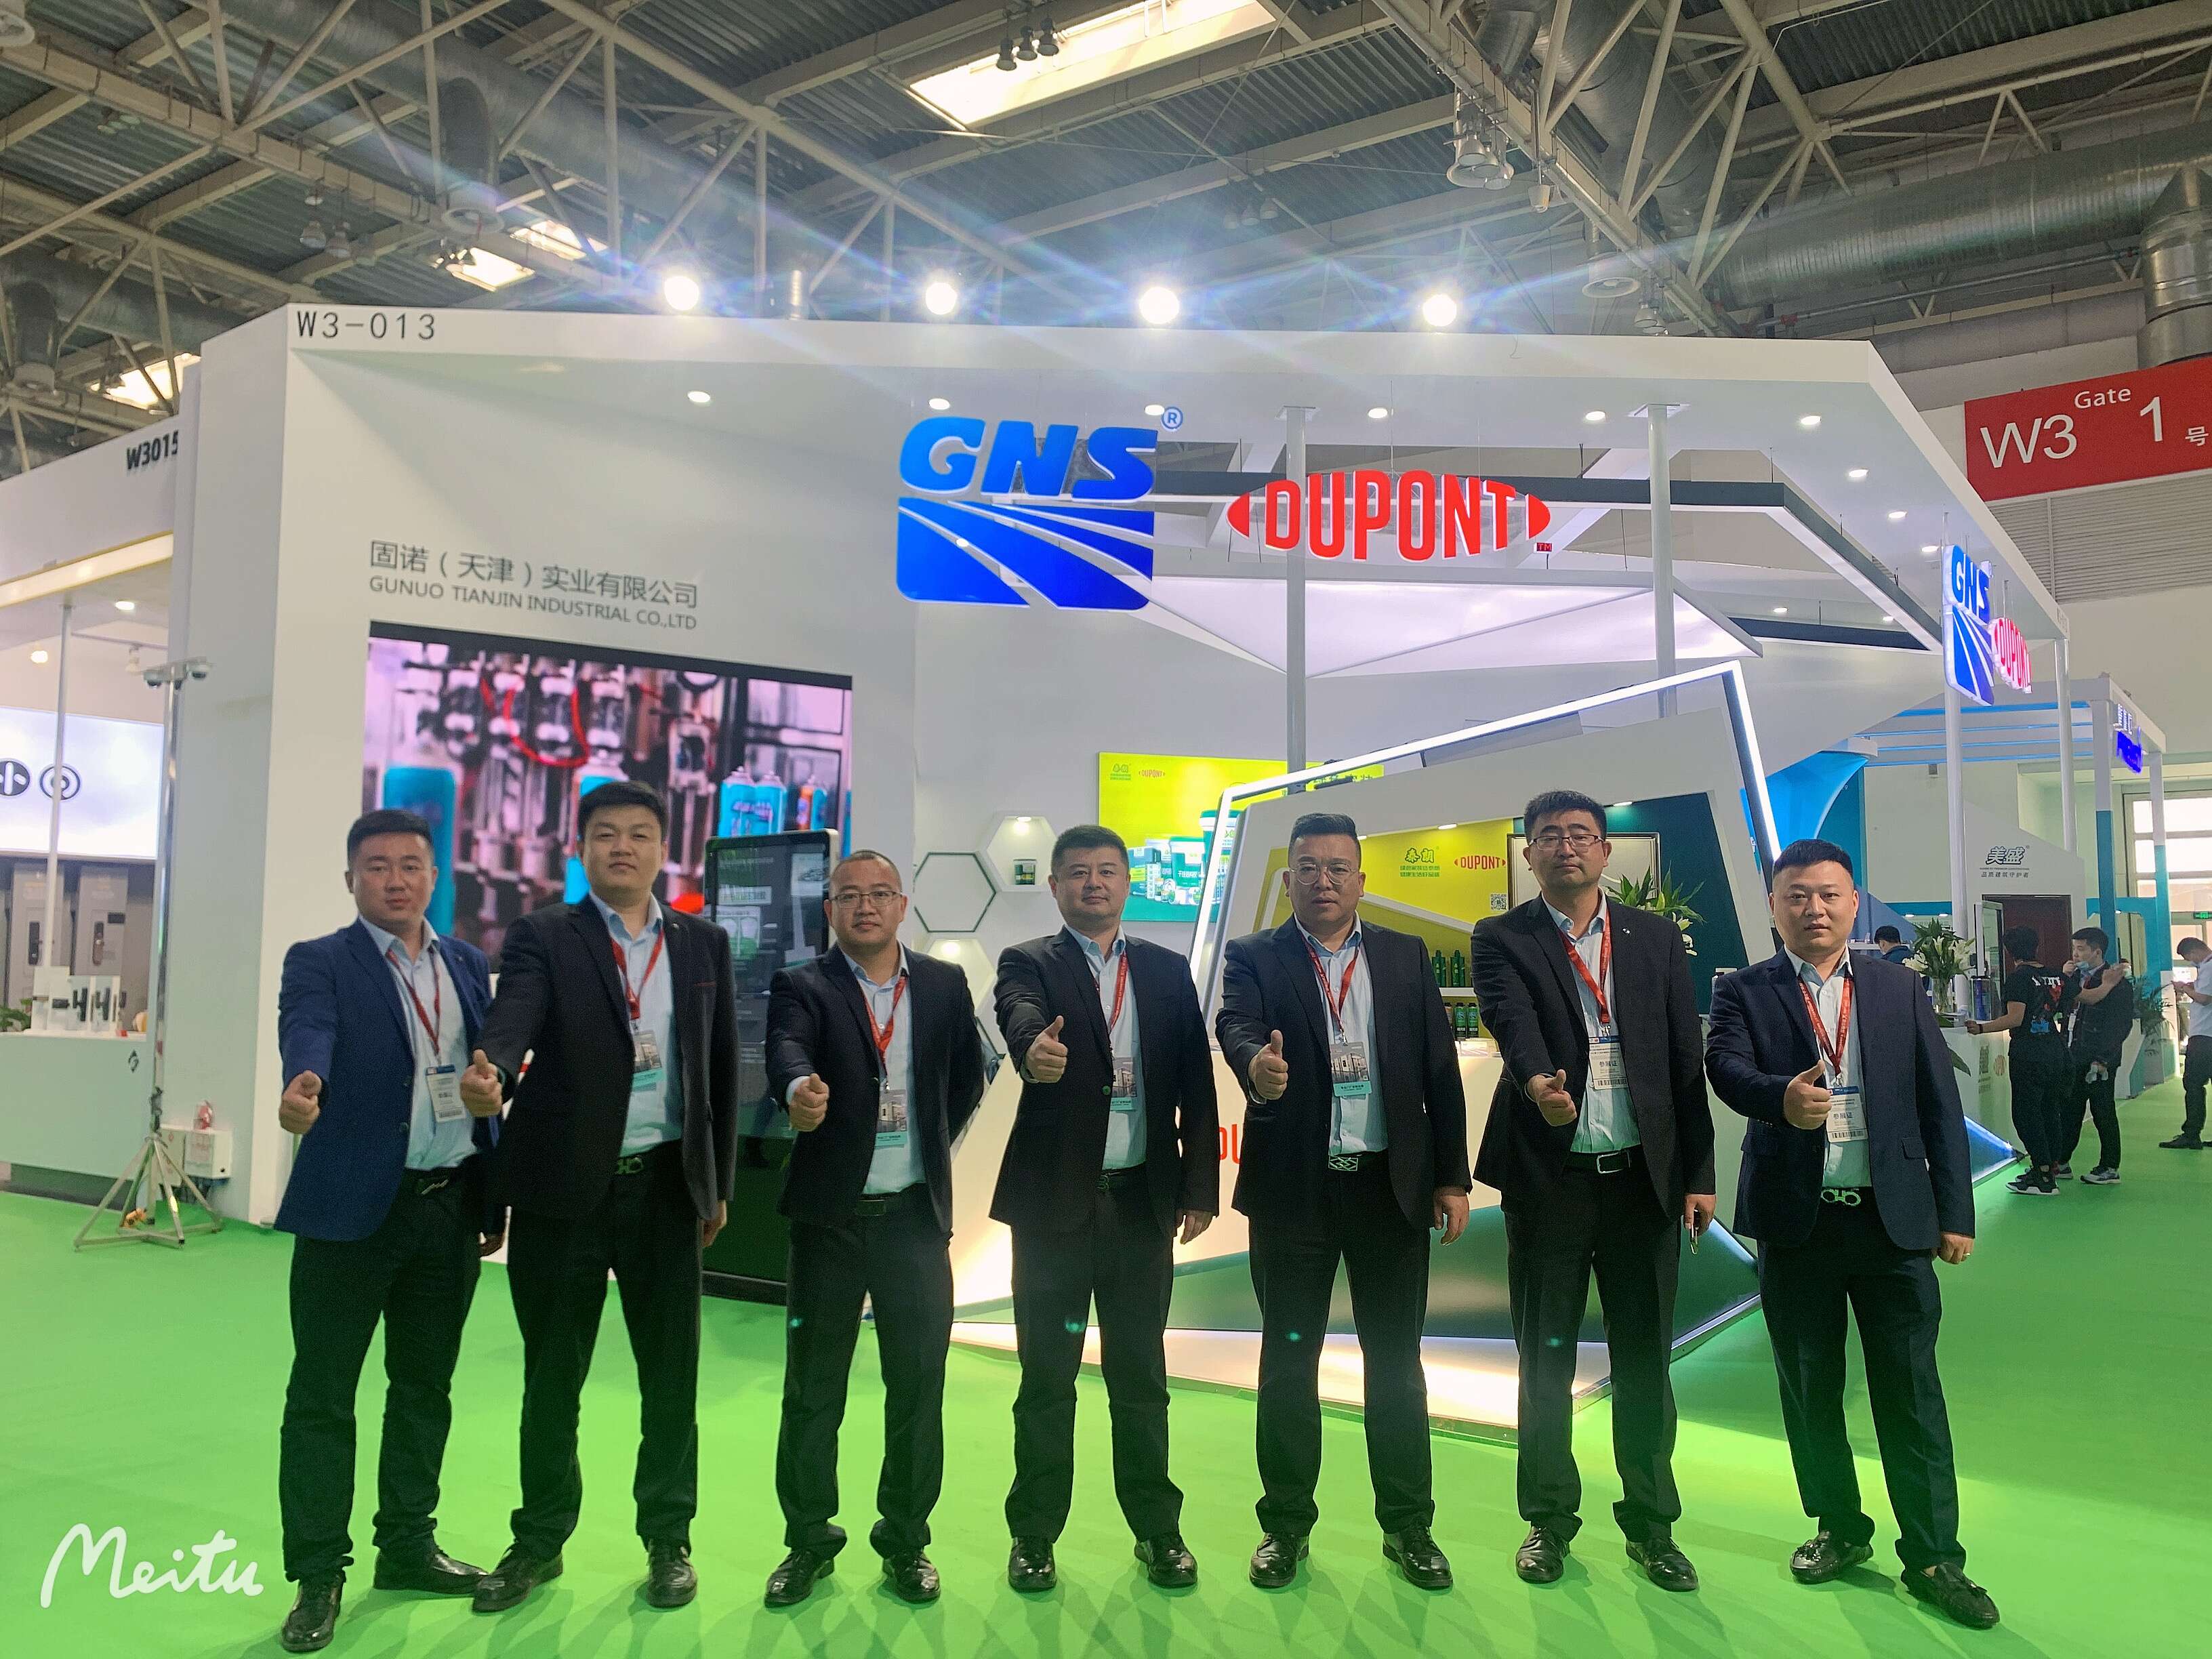 THE 19TH INTERNATIONAL DOOR INDUSTRY EXHIBITION IN CHINA